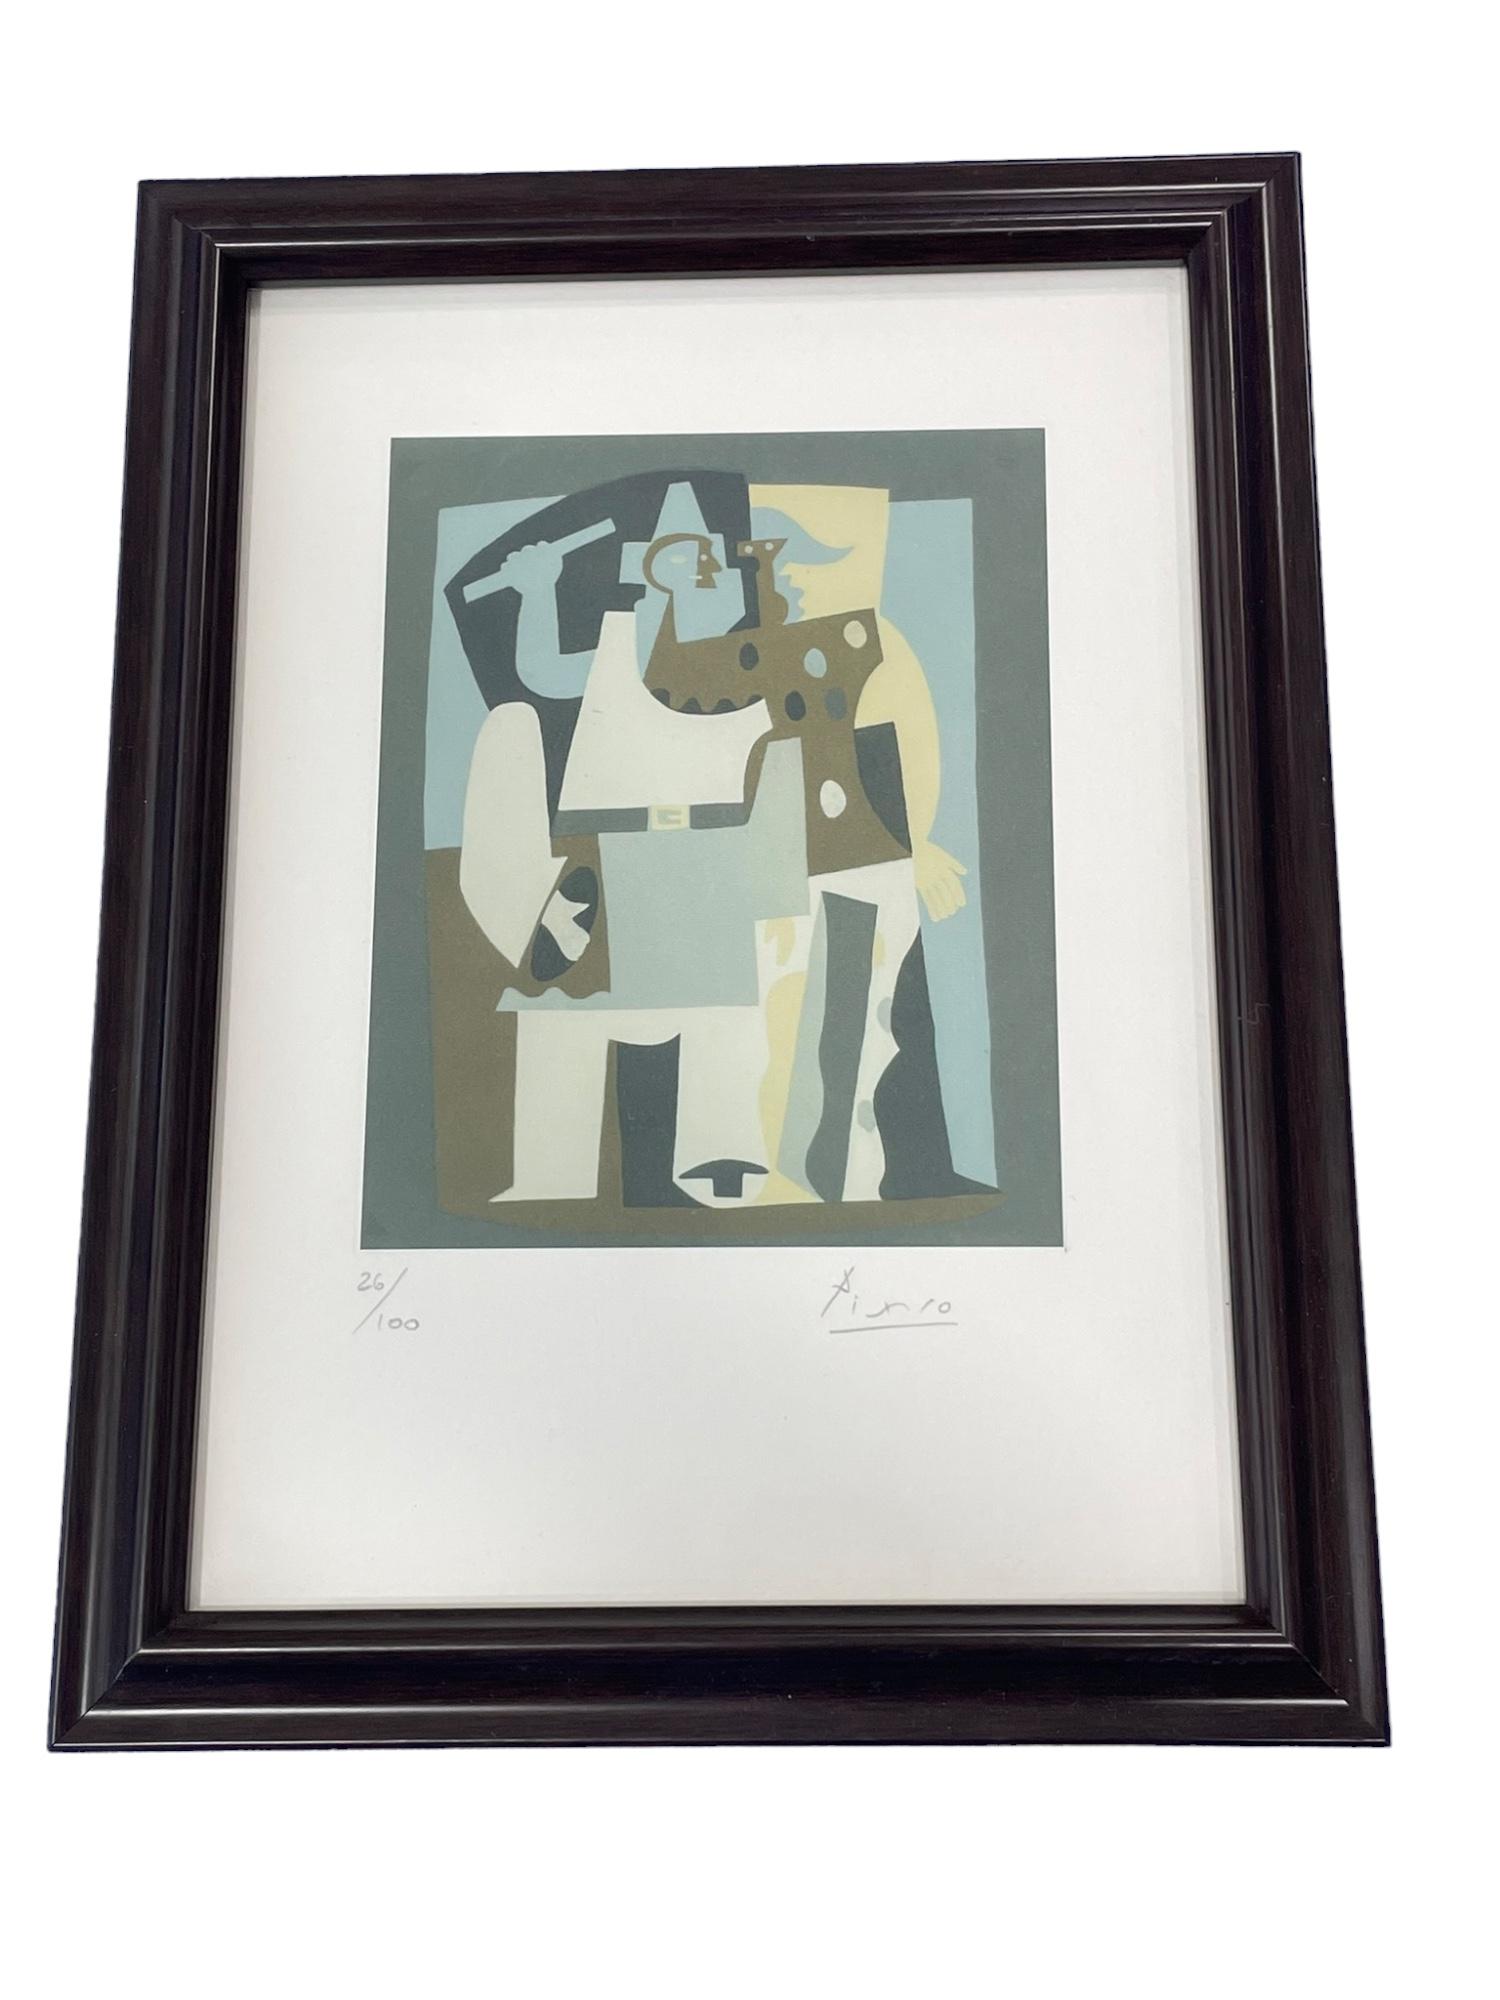 Pablo Picasso signed and numbered print 26/100